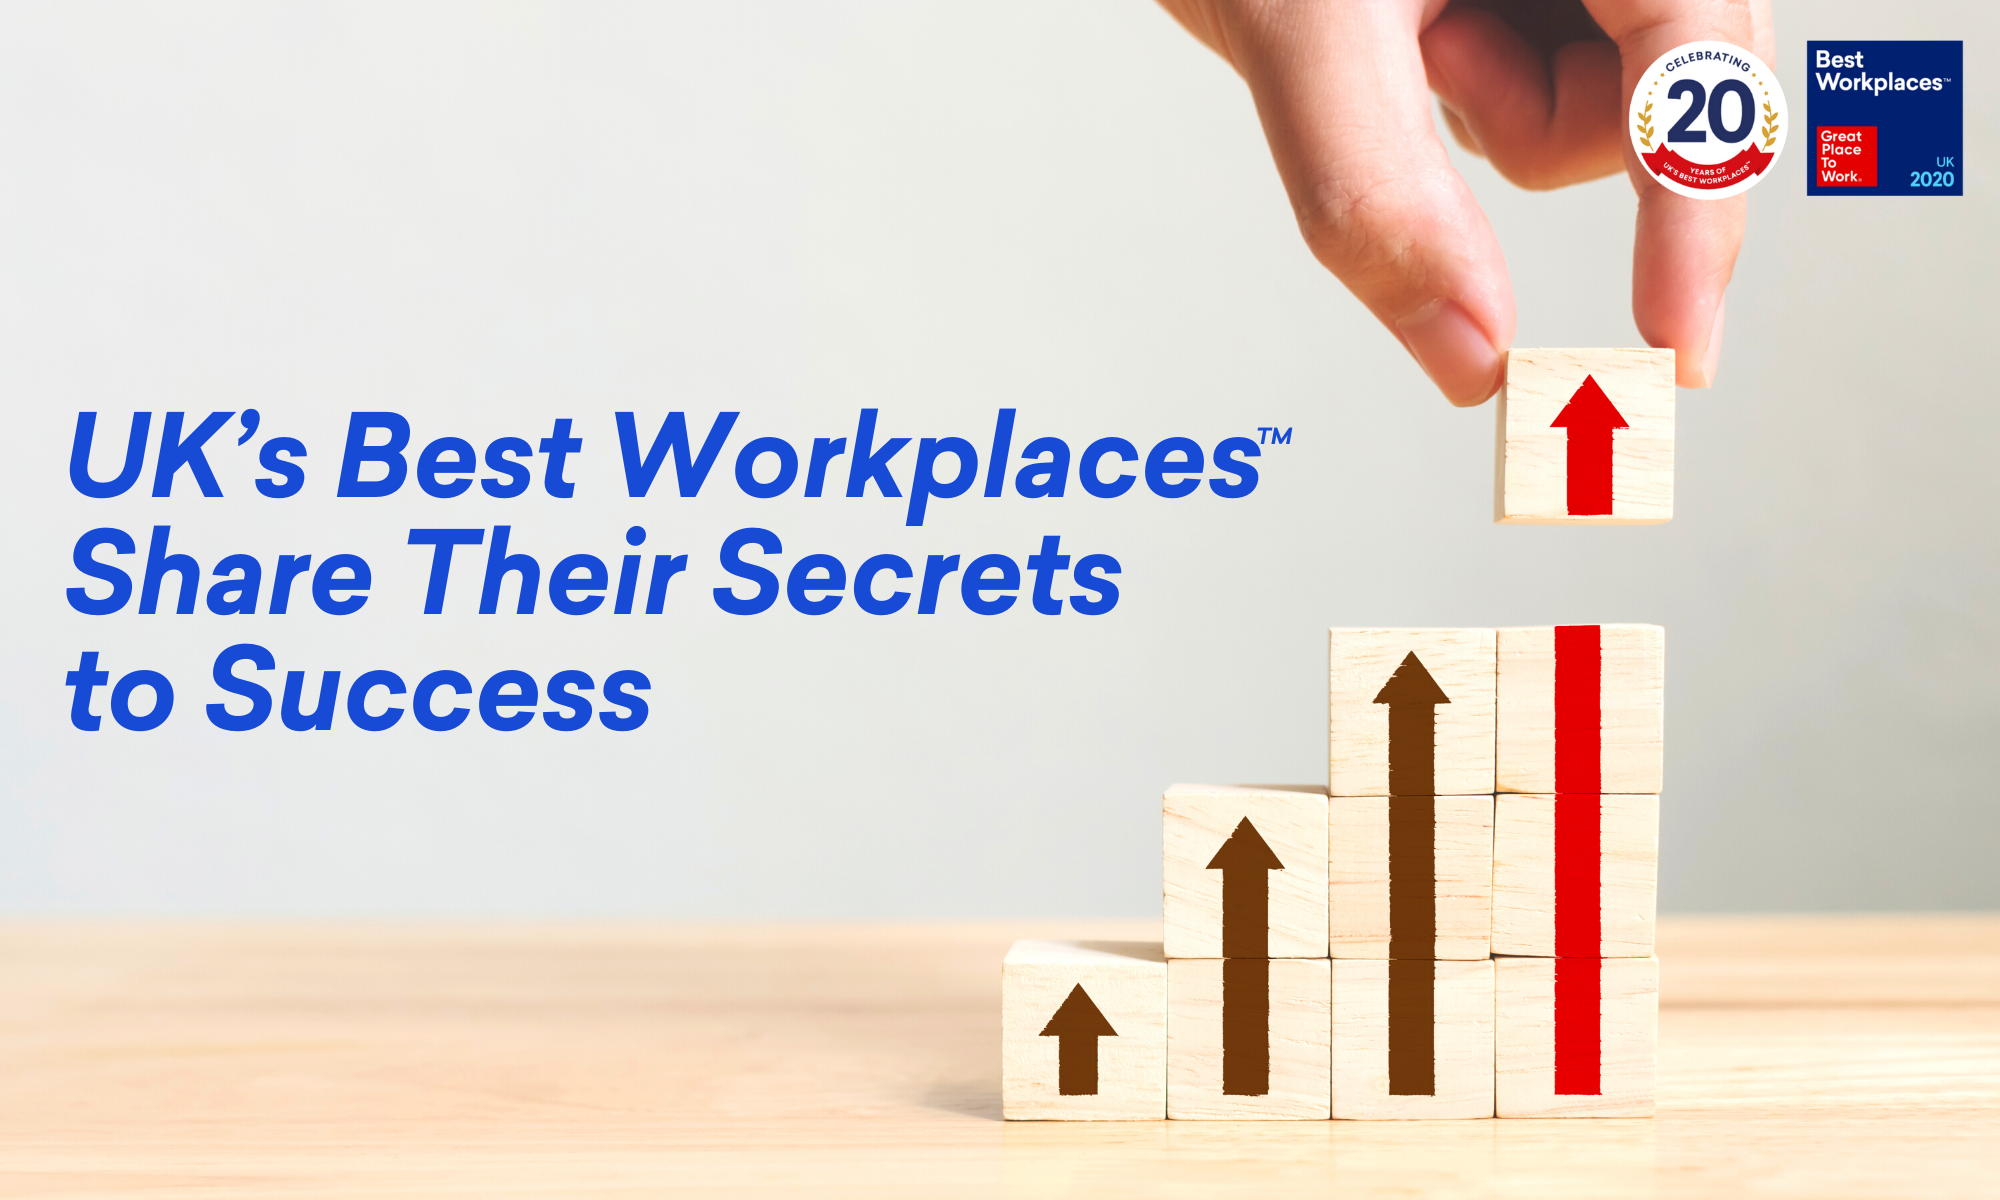 UK’s Best Workplaces Share Their Secrets to Success